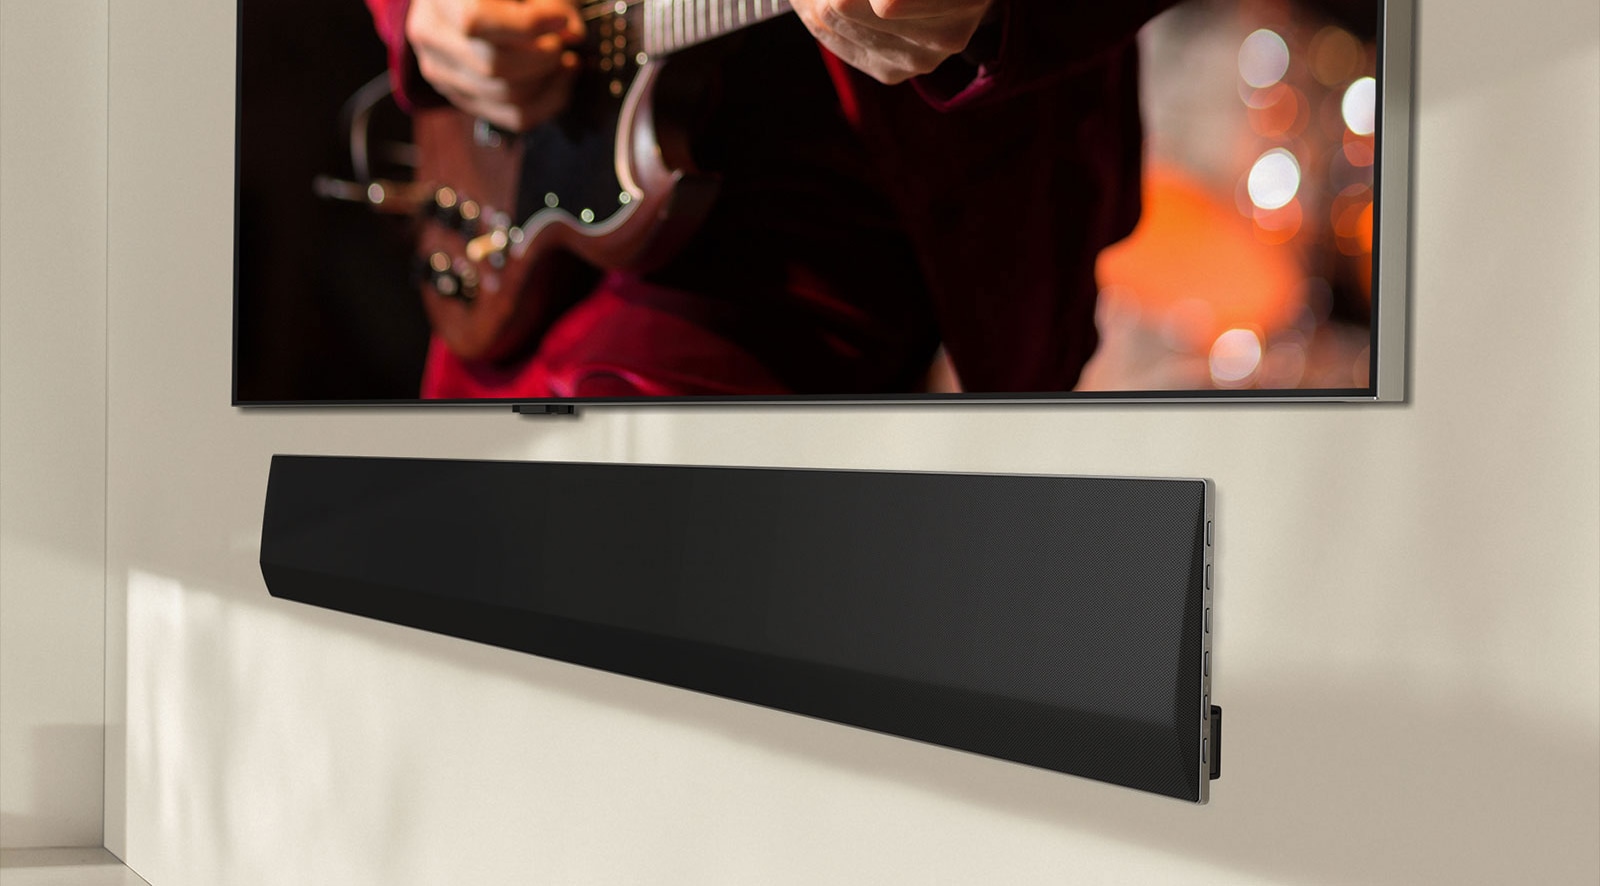 An image showing an angled view of the bottom of an LG OLED TV and LG Soundbar.